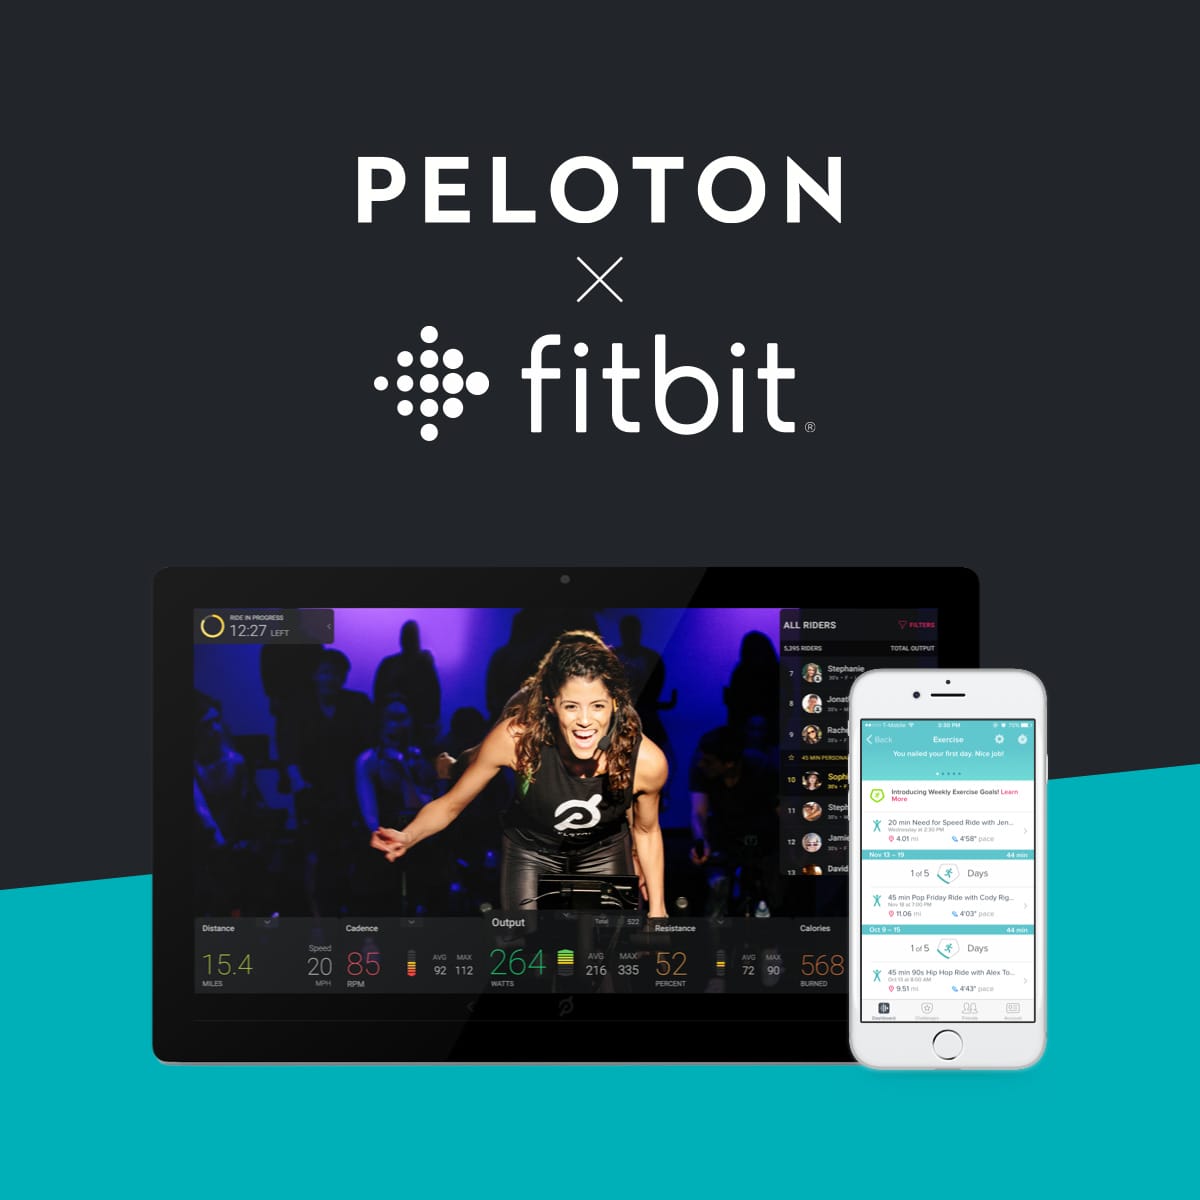 Does Fitbit connect with Peloton?